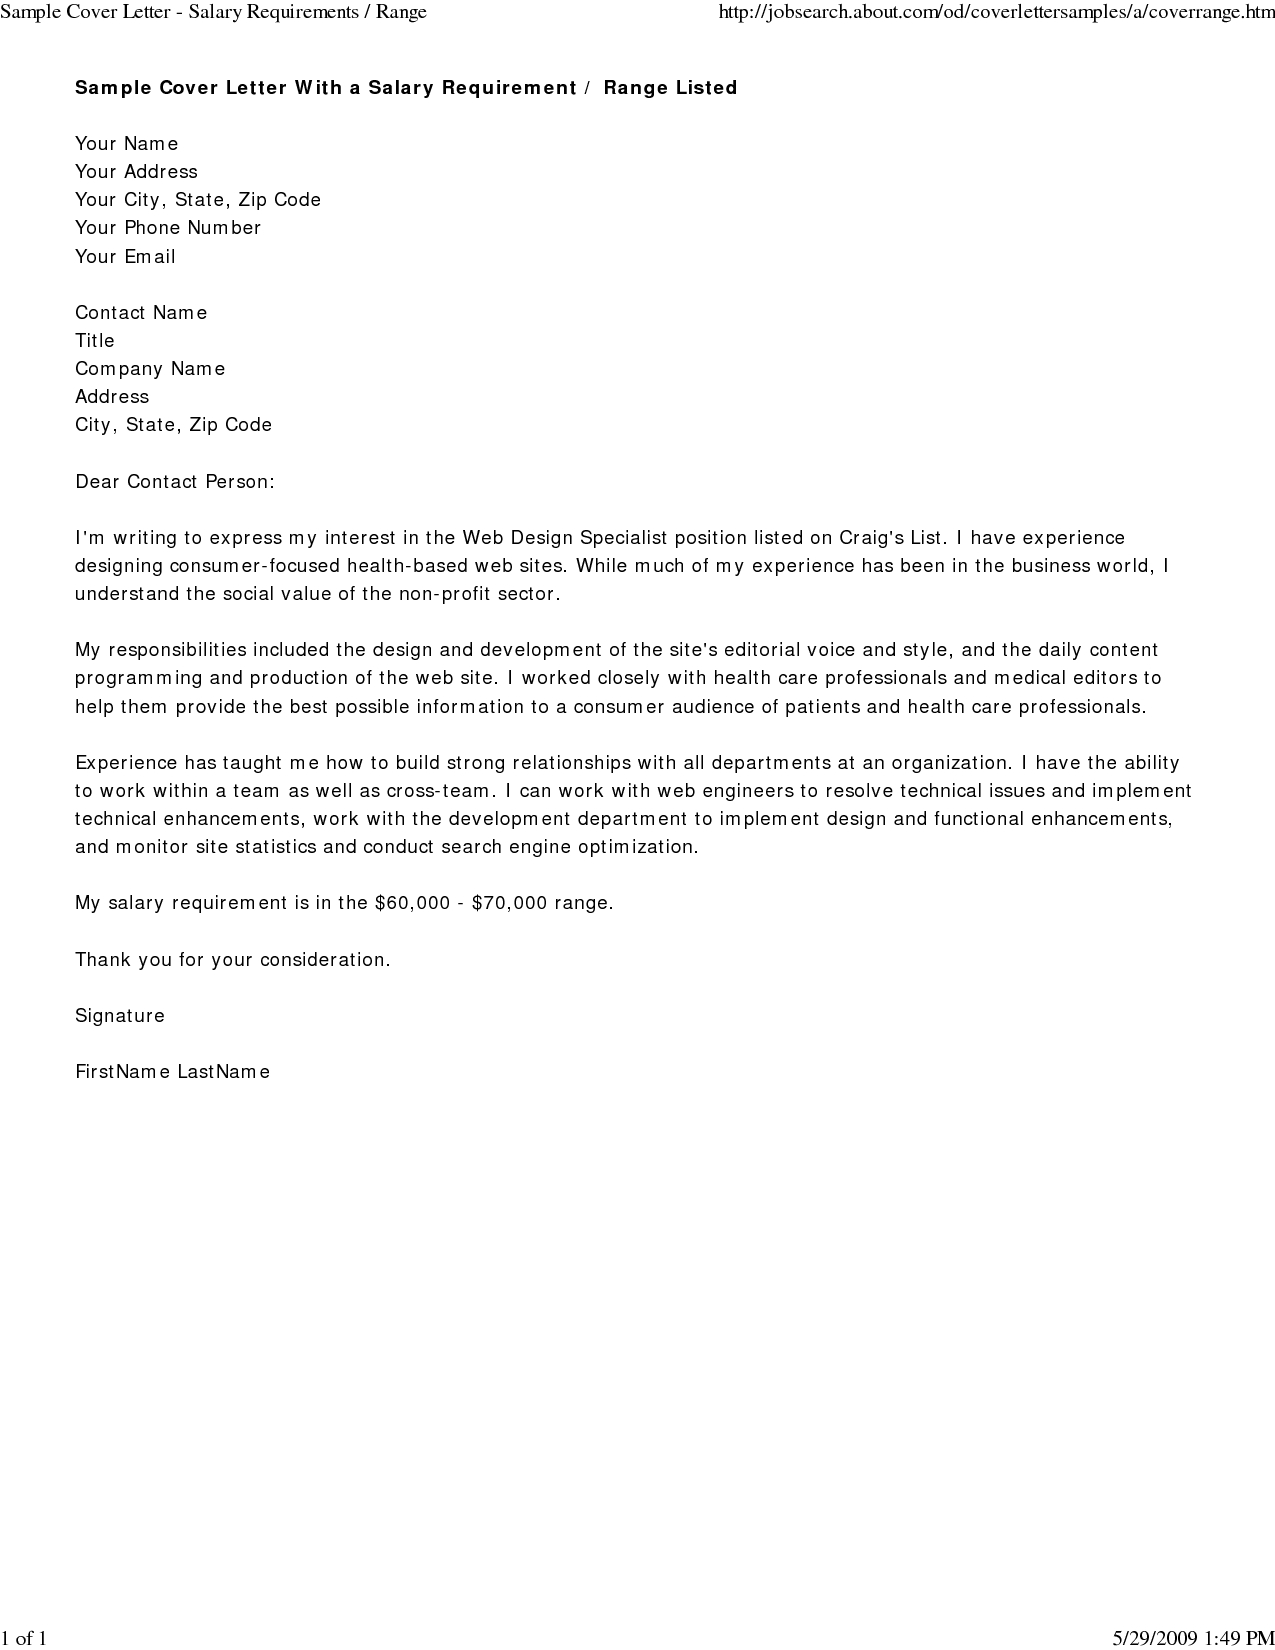 Fillable Cover Letter Template - Salary Requirements Cover Letter O